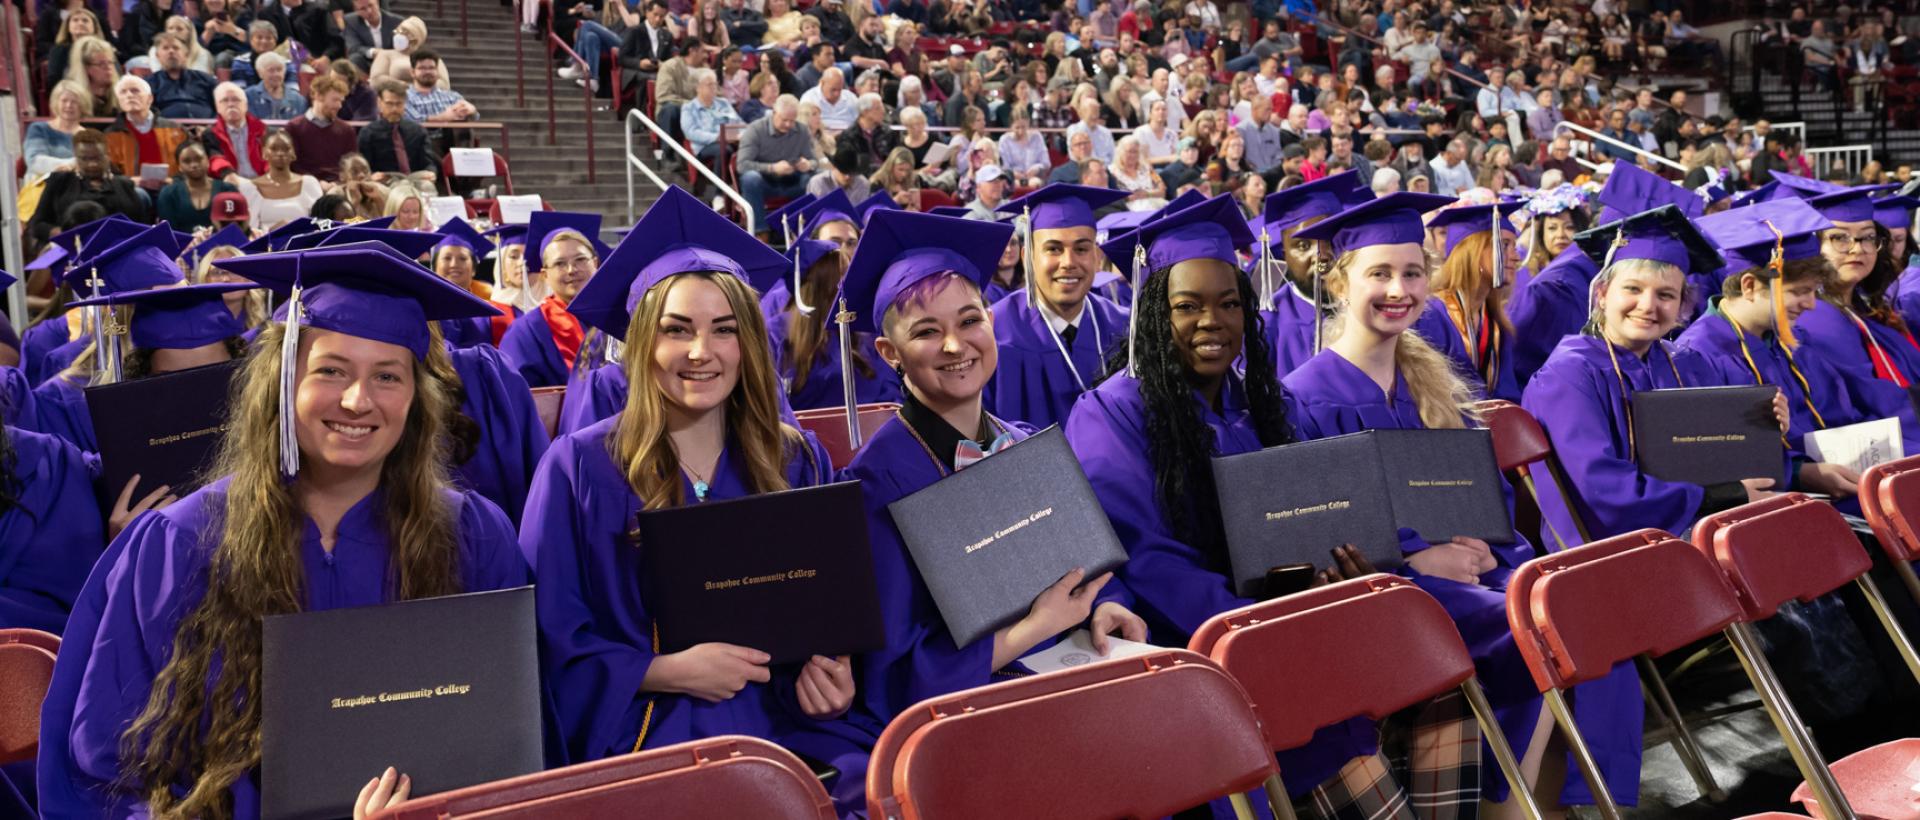 ACC graduates holding their diplomas during commencement at Magness Arena (DU).